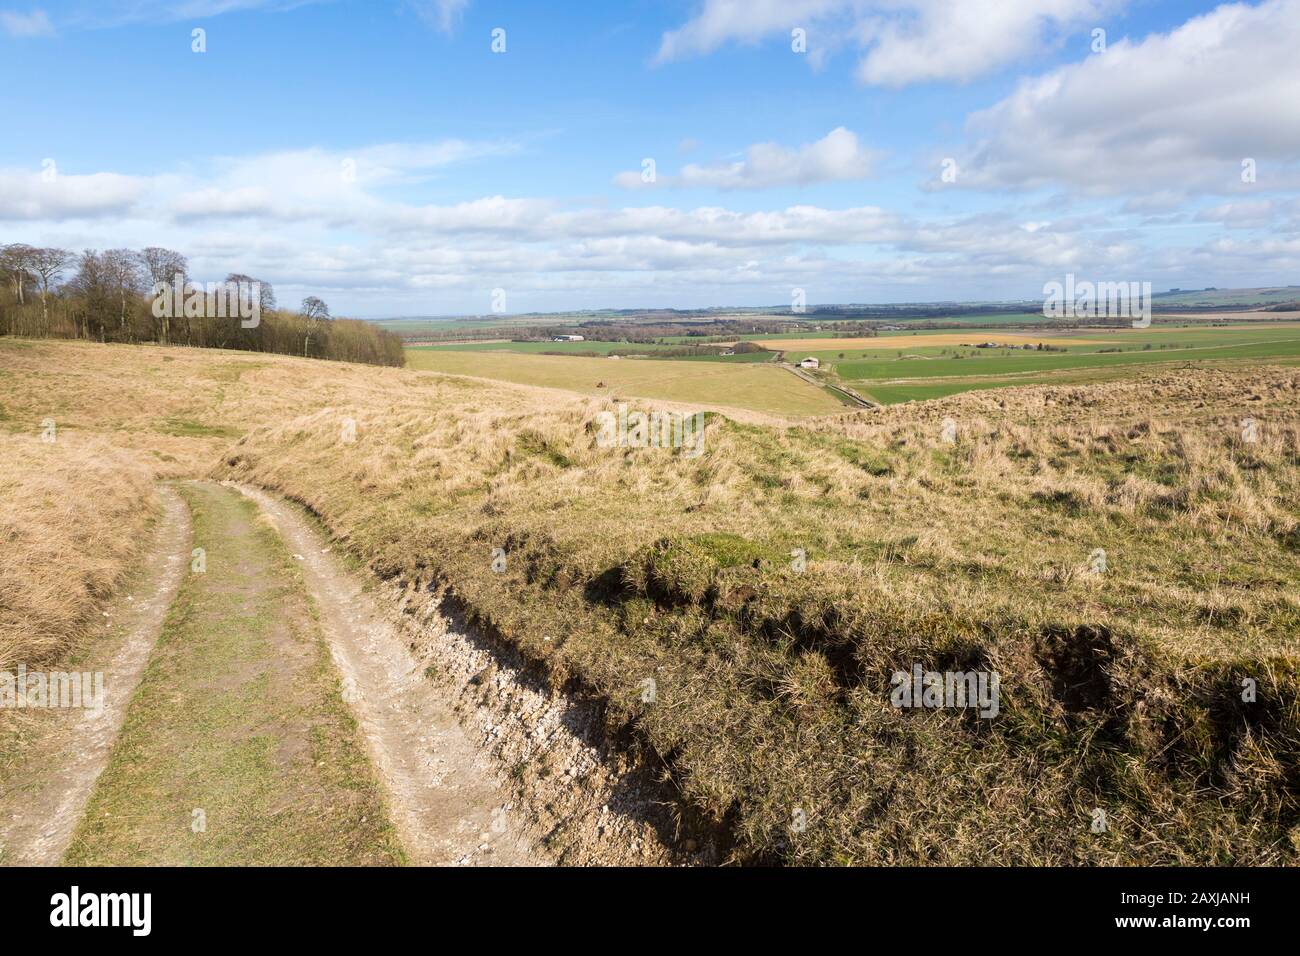 Undulating countryside upland chalk landscape in winter downland area of North Wessex Downs, near Cherhill, Wiltshire, England, UK Stock Photo